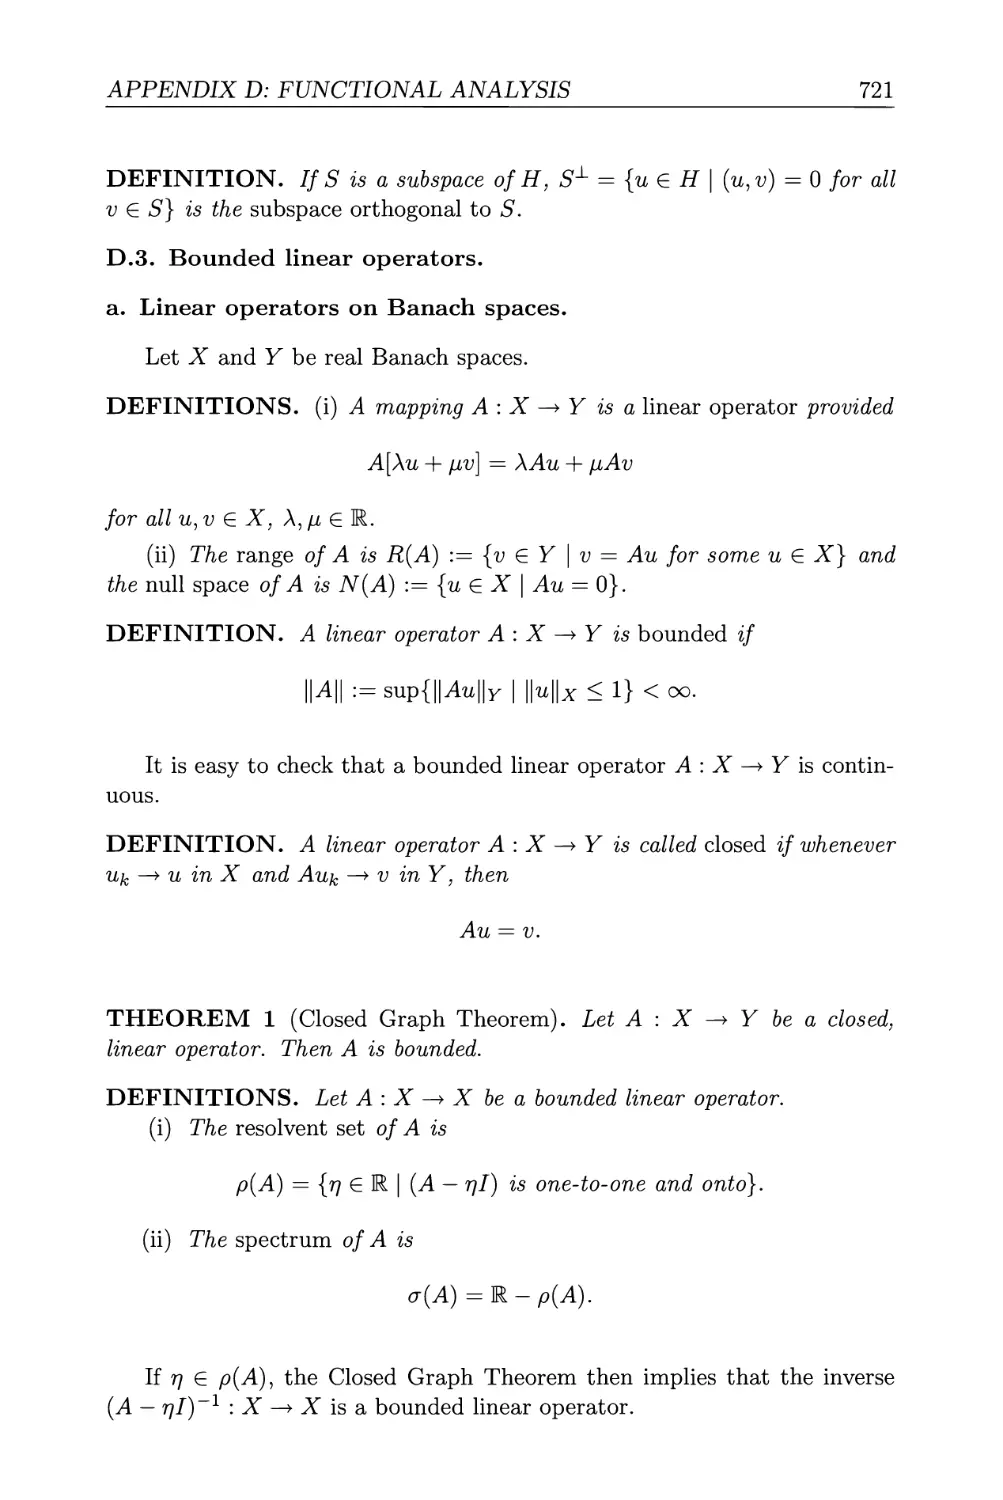 D.3. Bounded linear operators